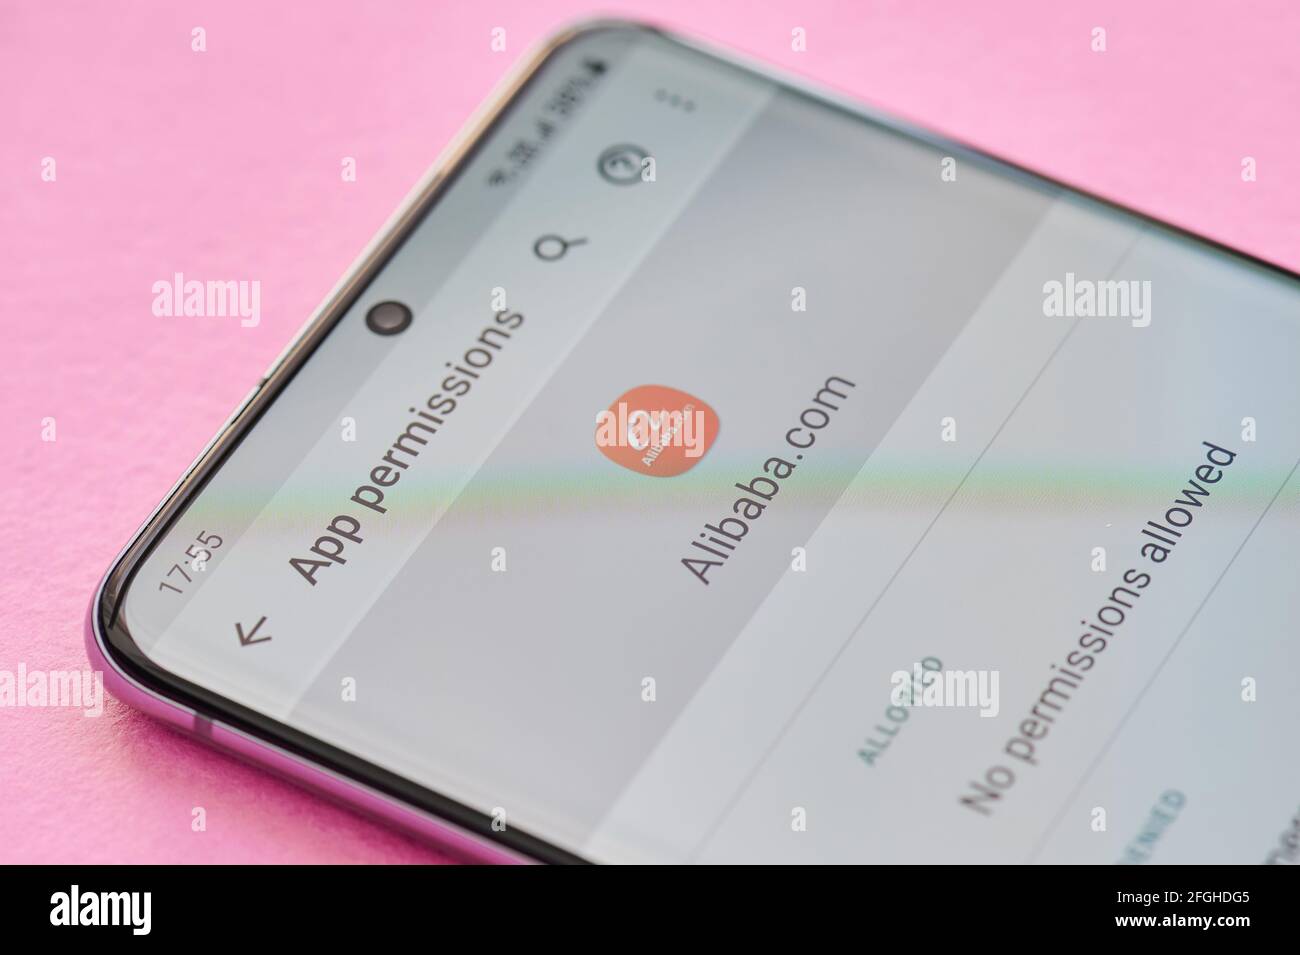 New york, USA - April 23, 2021: Changing permissions setting of Alibaba app on smartphone screen macro close up view Stock Photo